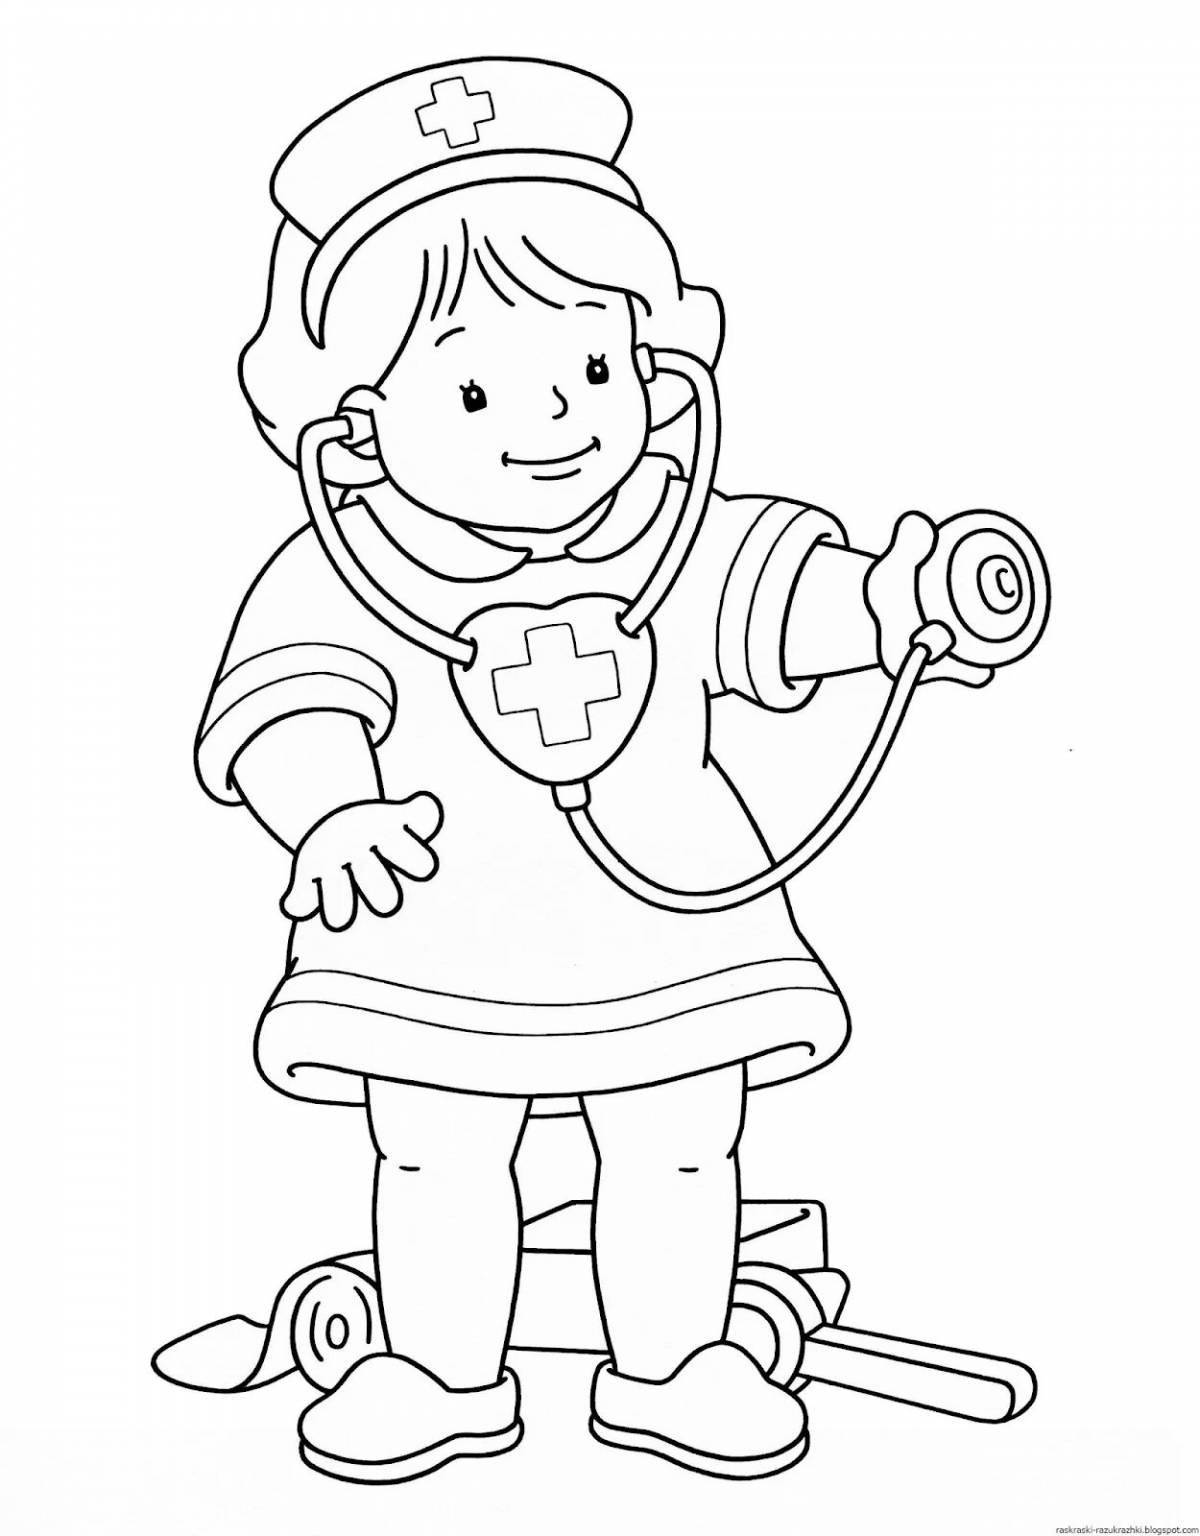 Joyful job coloring pages for babies